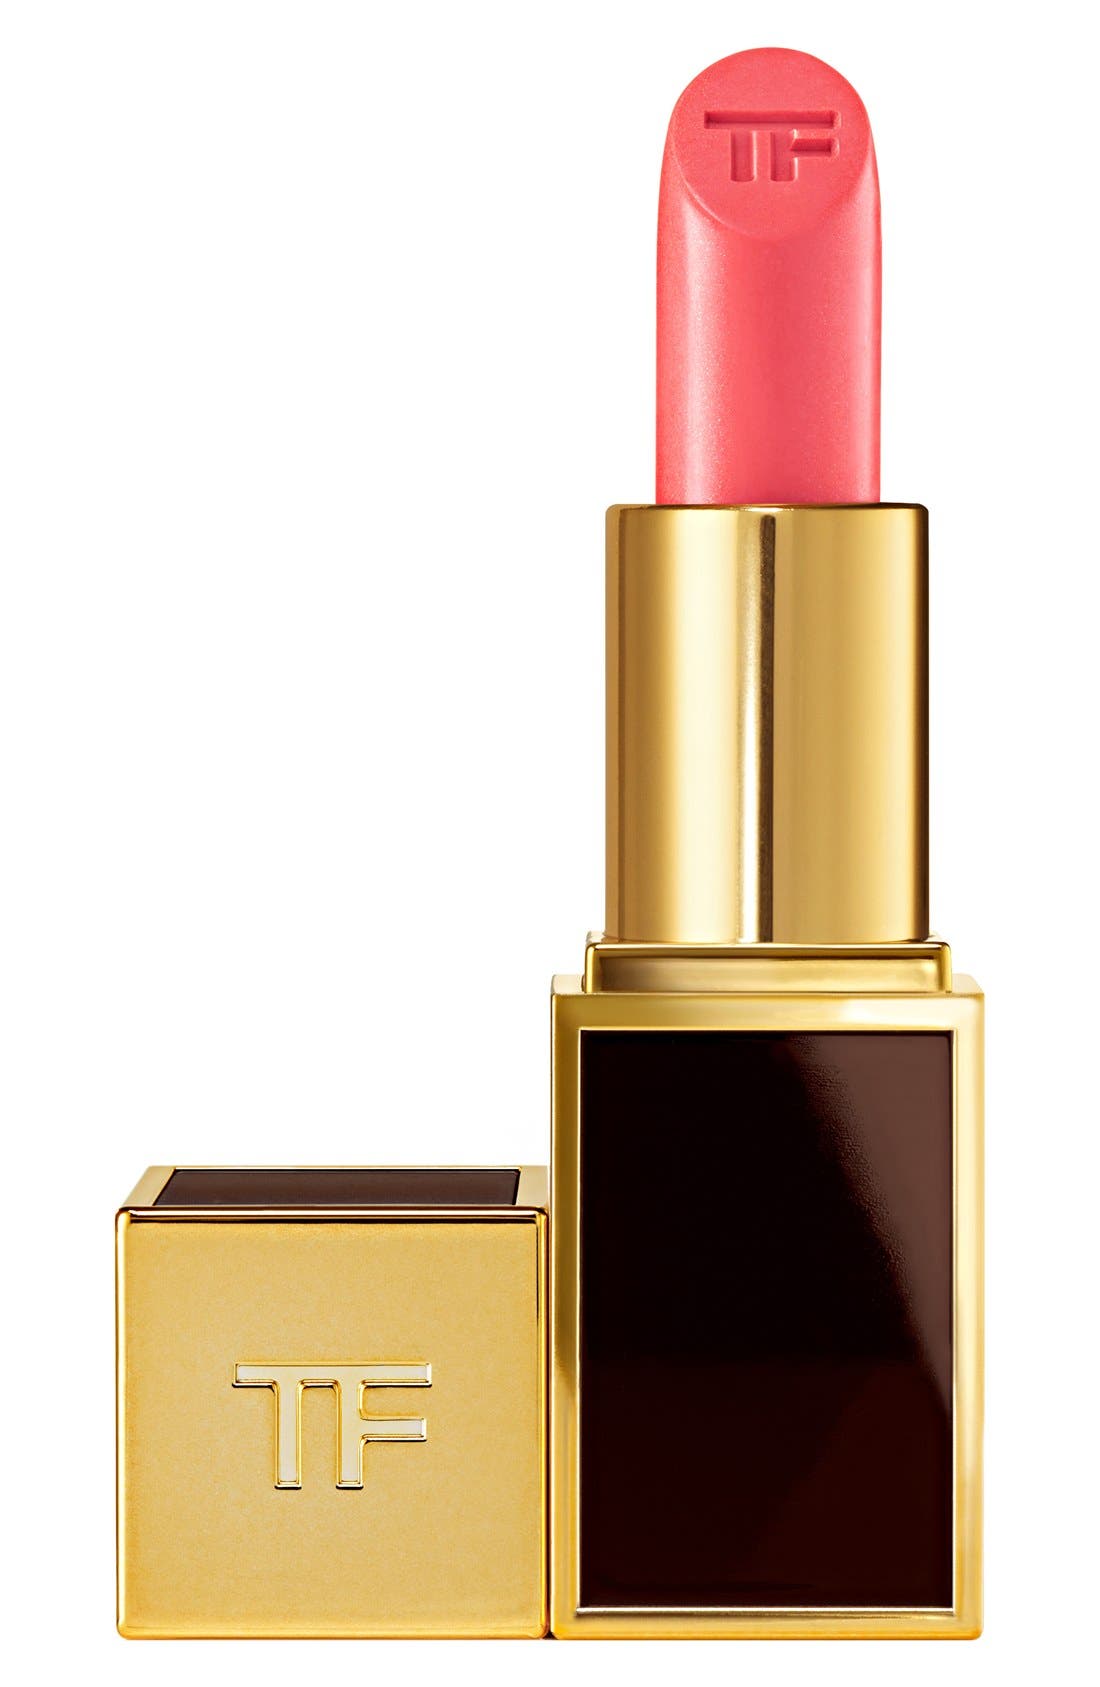 UPC 888066037211 product image for Tom Ford 'Lips & Boys' Deluxe Mini Lip Color Patrick One Size | upcitemdb.com